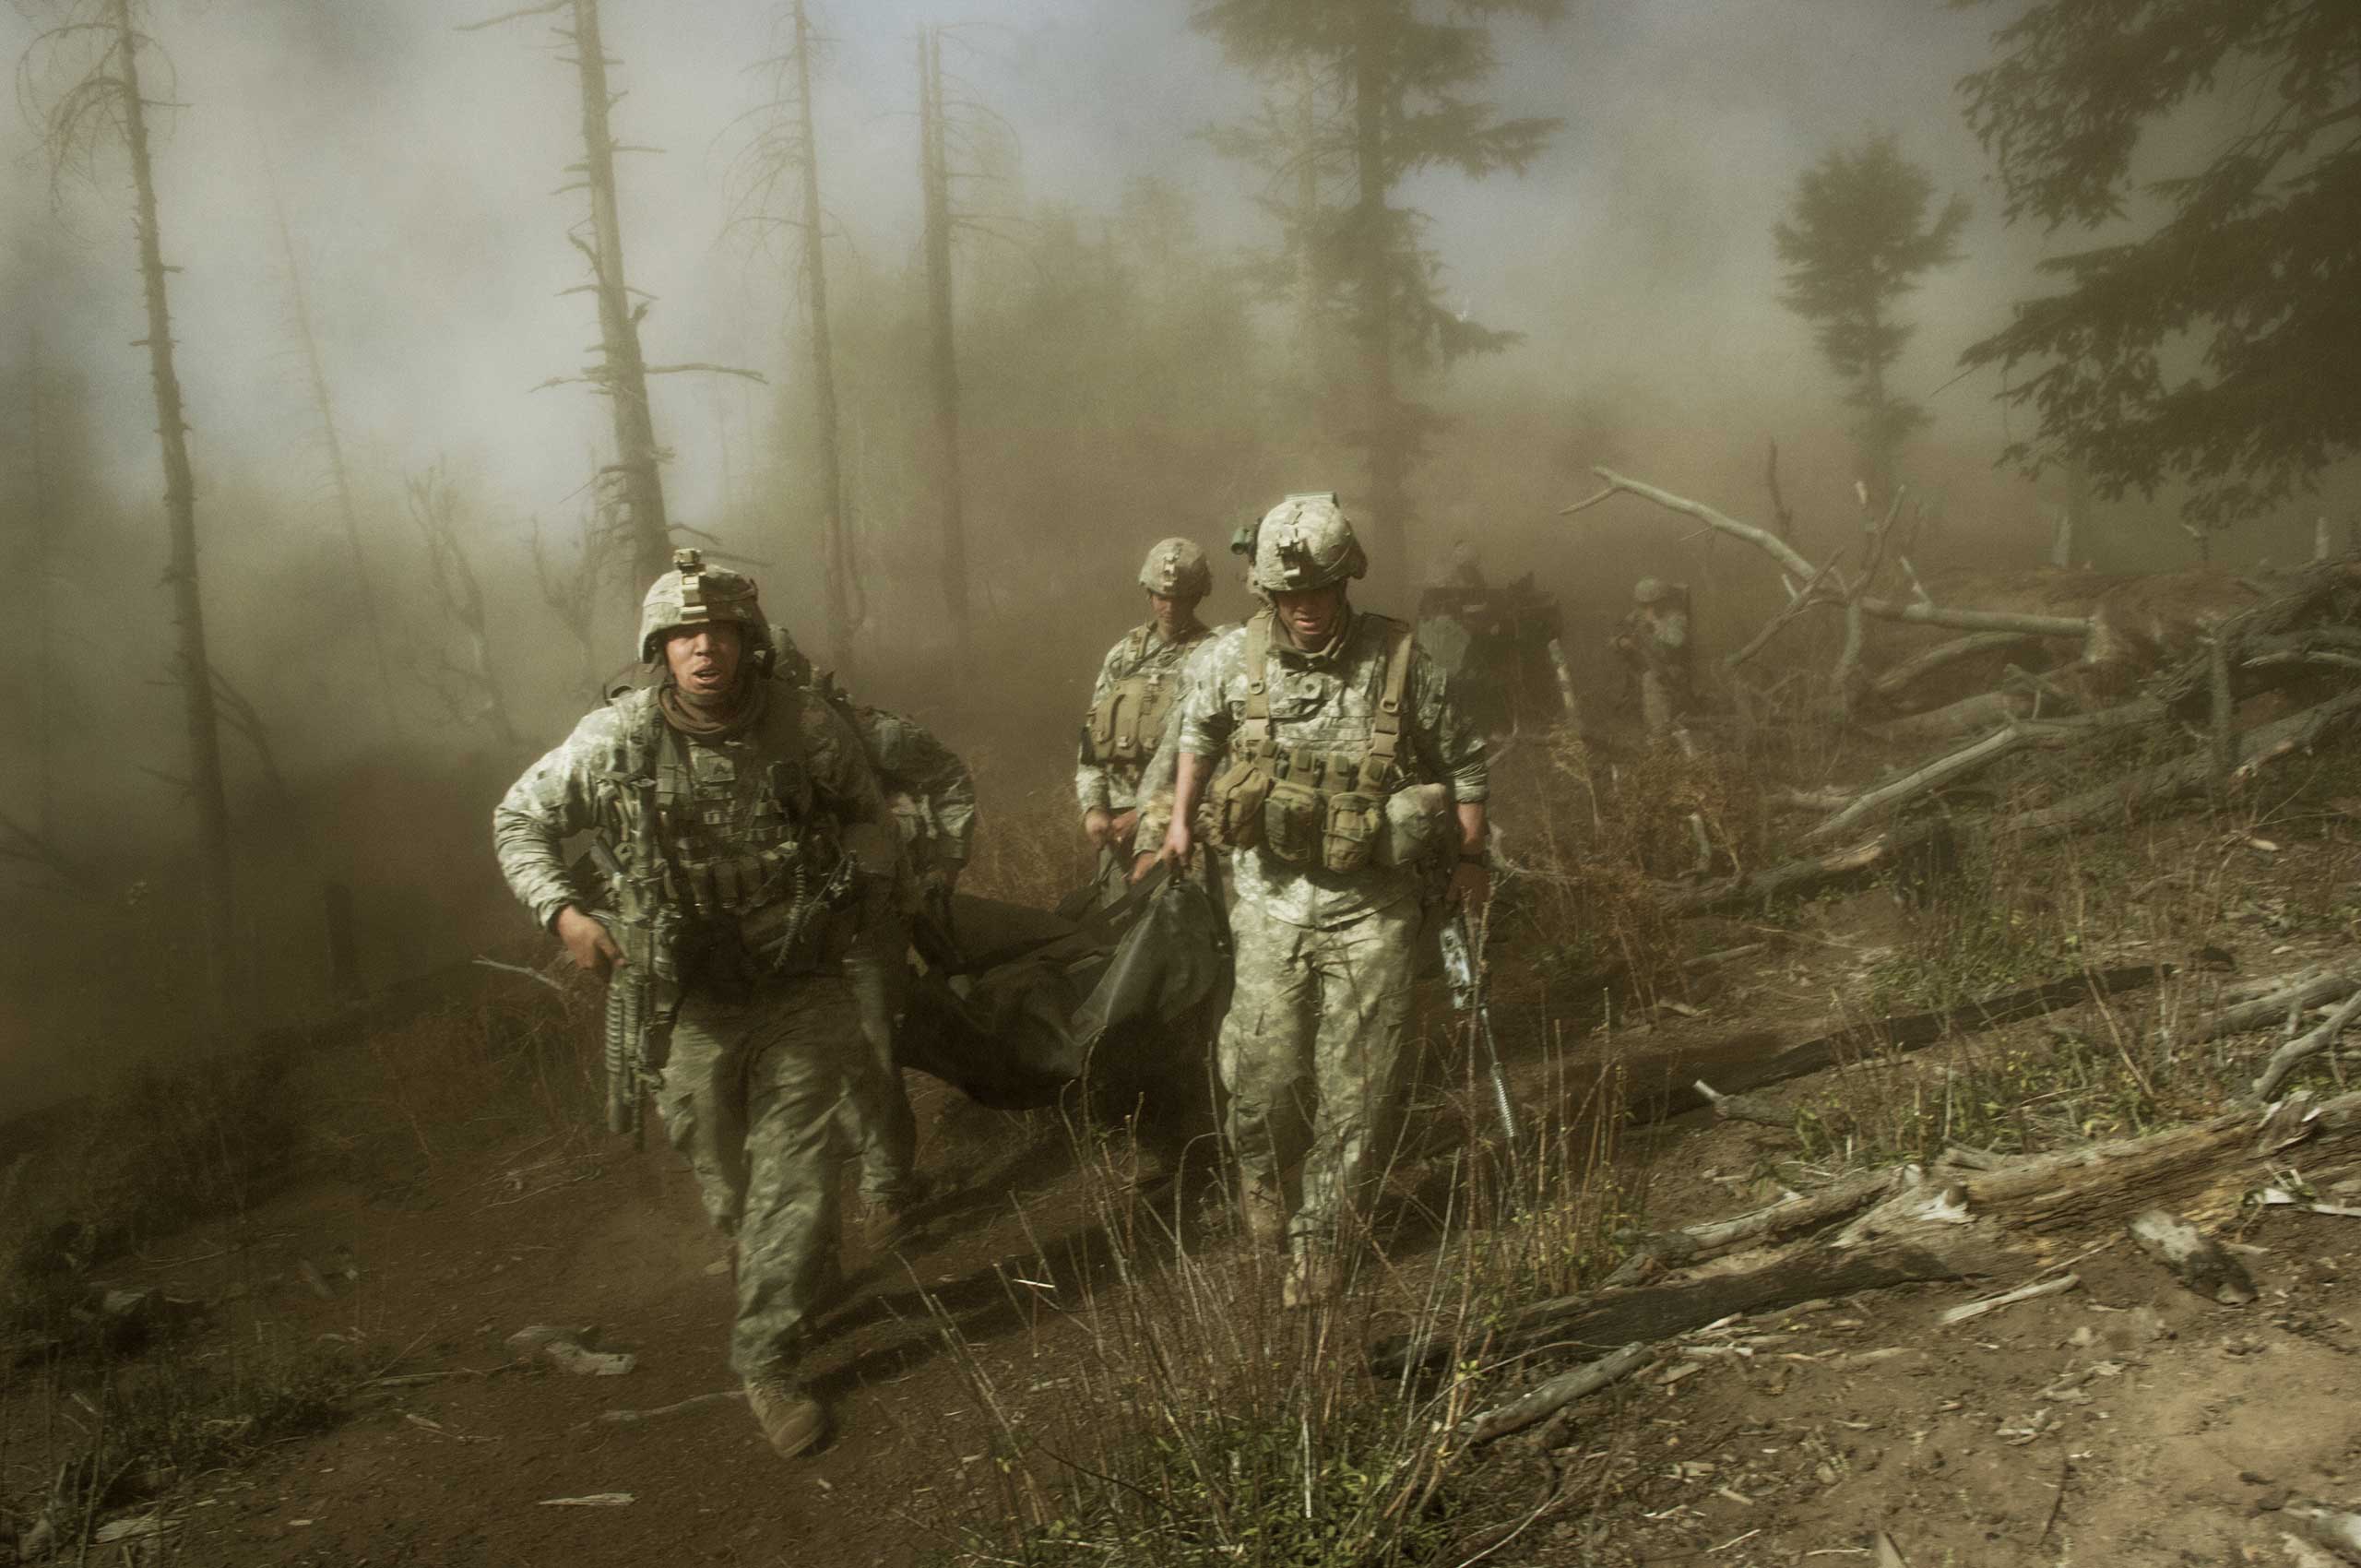 Staff Sergeant Larry Rougle.Lynsey Addario, Oct. 23, 2007. Afghanistan.
                               Moments before they emerged from the dust carrying Sgt Larry Rougle’s body, one of the troops with the 173rd Airborne nearby said: 'we have to go get the K.I.A.' I hadn’t yet connected the dots that the person who was killed in action  was Sgt Rougle. I knew that in the chaos of the ambush, there were three men down.  As bullets pierced the narrow cedar trees around us, I had heard the call on the radio that three men had been hit, and heard that Wildcat was one of them.  Wildcat was Rougle’s call sign.
                              
                              But when the MEDEVAC helicopter lifted off the mountainside with two of the three wounded, the words smacked me in the face: 'we have to go get the K.I.A.'  Wildcat was not among the wounded. Four members of the Scout team carried his body in a body bag through the gnarly and lonely landscape. In the hours, days, and weeks before, Rougle was so alive, so strong and sturdy, and suddenly, he was lifeless, in a black, shiny, rubbery bag.  I asked permission from his comrades to photograph, and they nodded yes. I was crying so hard, it was difficult to focus.  Rougle’s mother didn’t even know her son had been killed. His fiancee didn’t know her husband to be was no more.  The war seemed so futile in that very moment.  Across a dusty ridgeline in the middle of nowhere, in Afghanistan, where so many foreign soldiers had died before the Americans arrived, and so many more probably would in years to come, the war had never seemed so close yet so incomprehensible all at once.